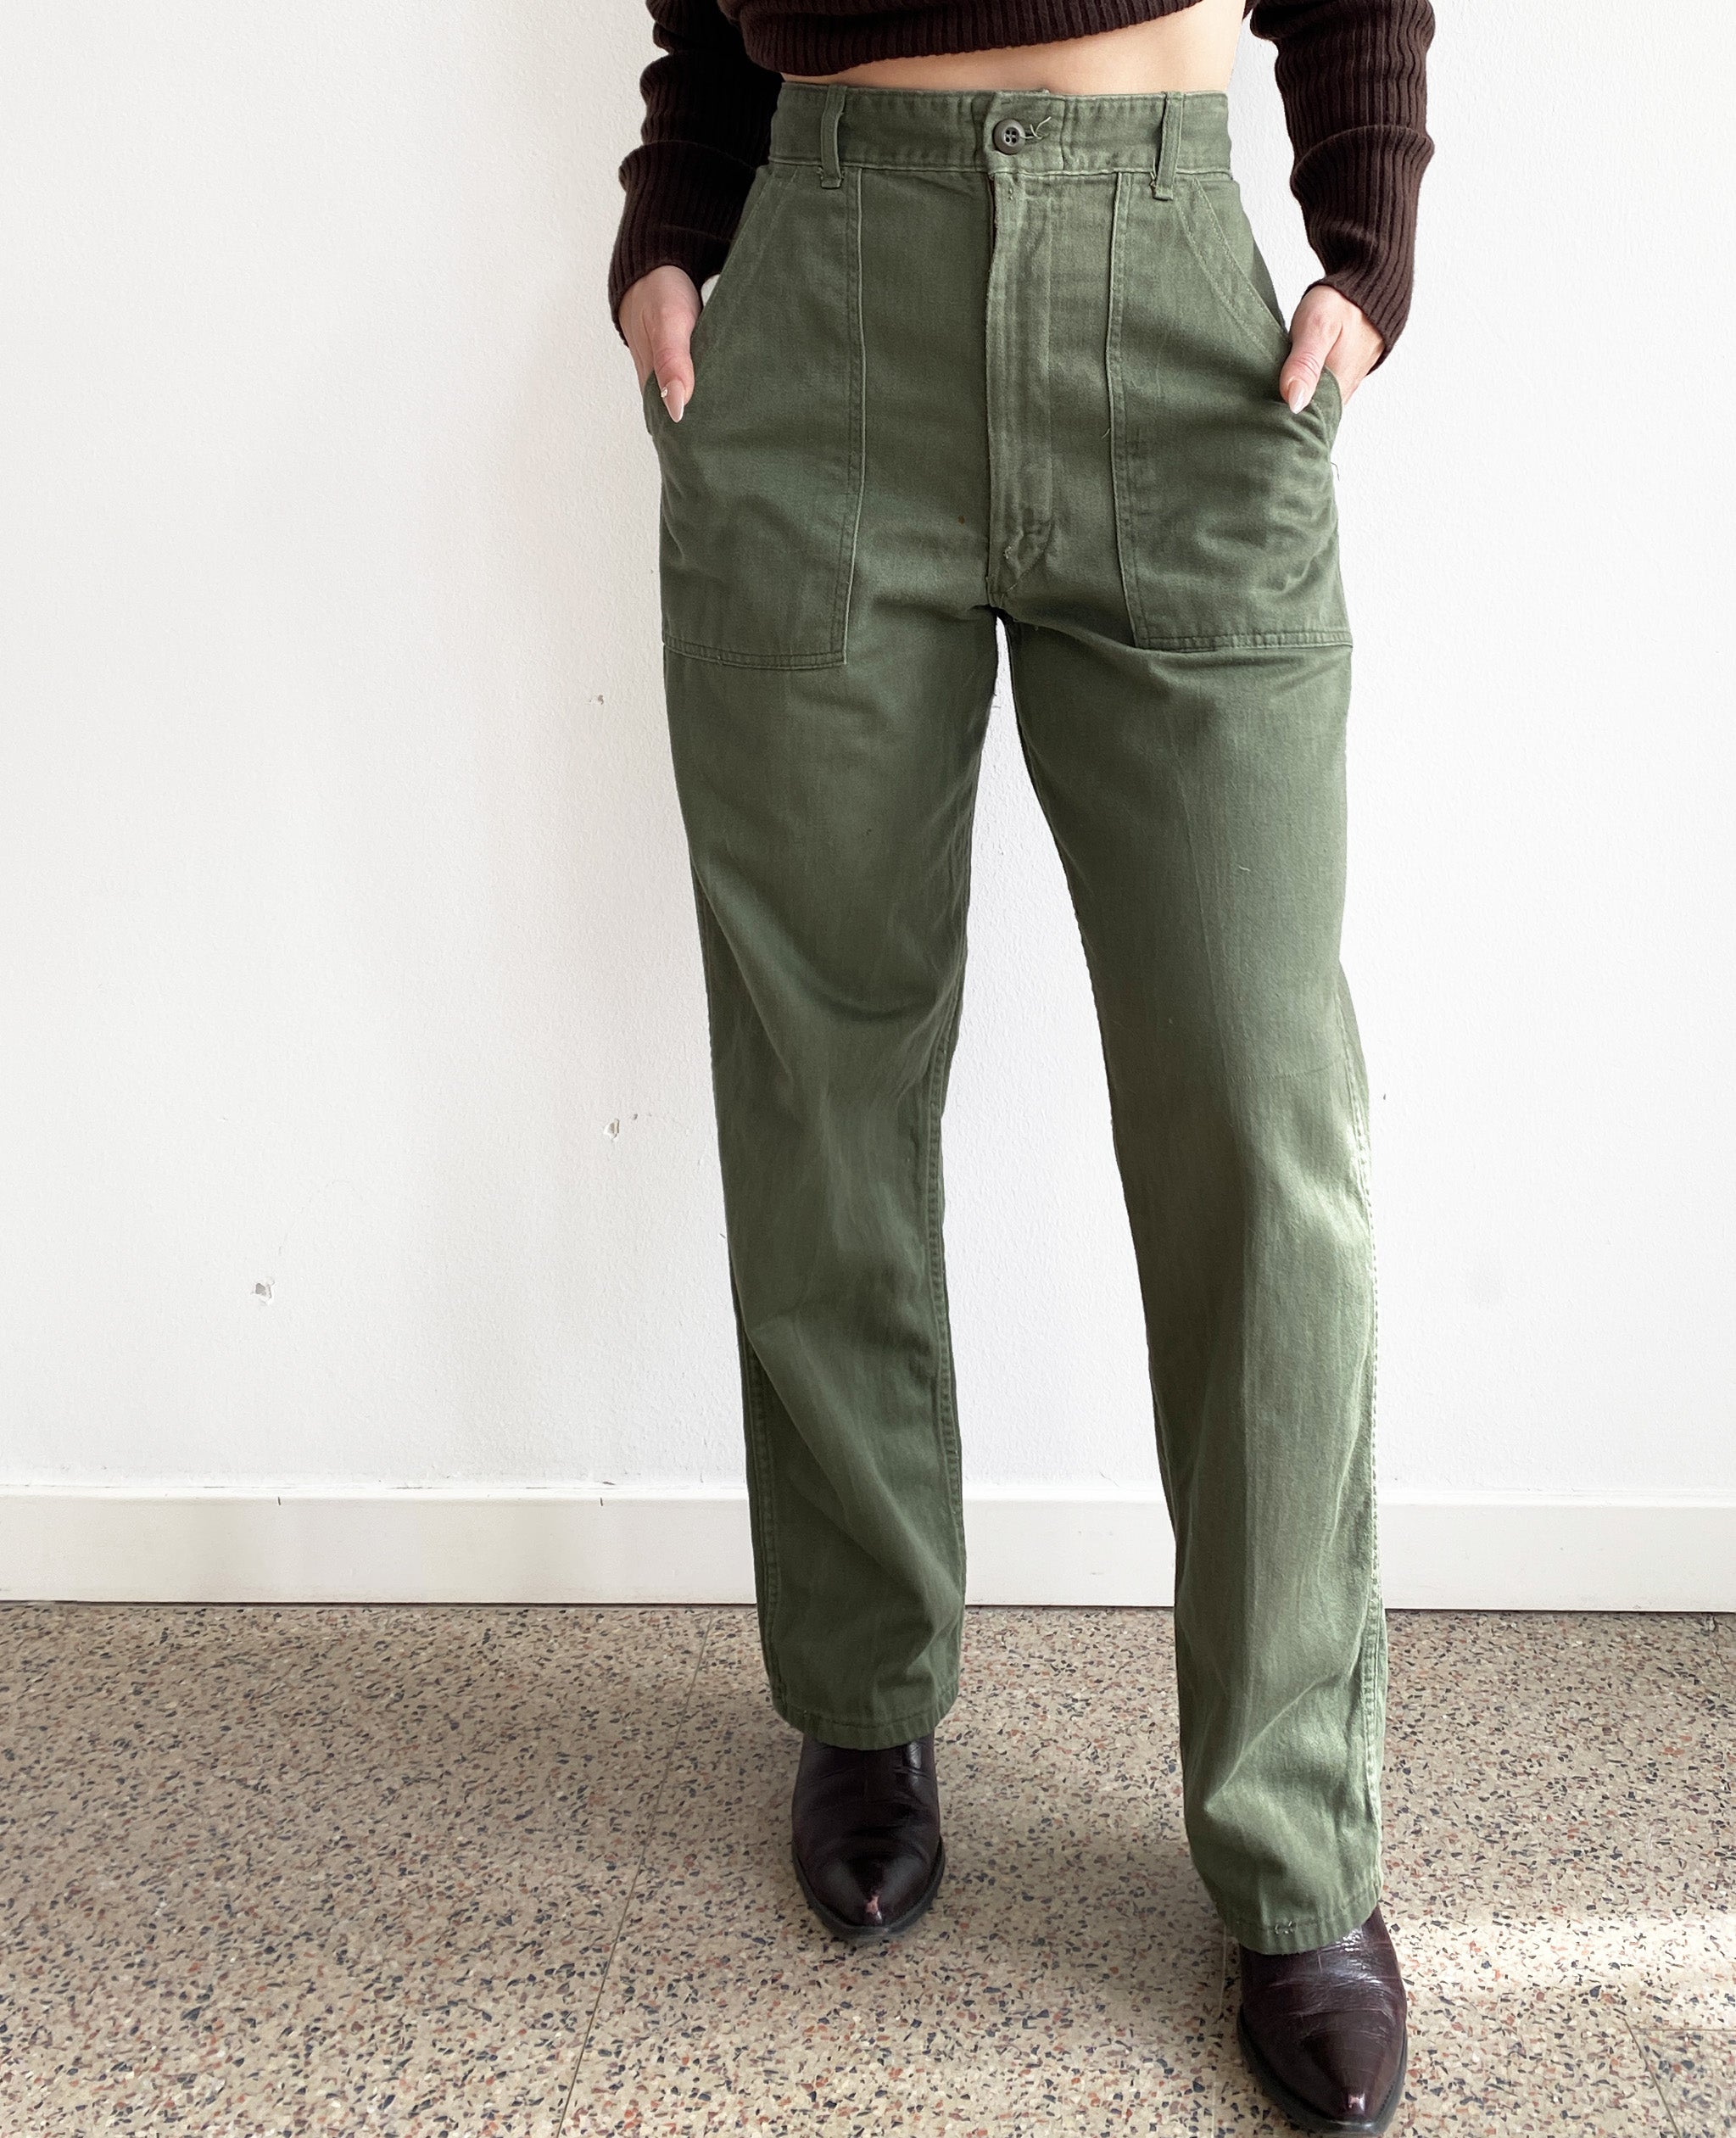 Solid Green Army Pant